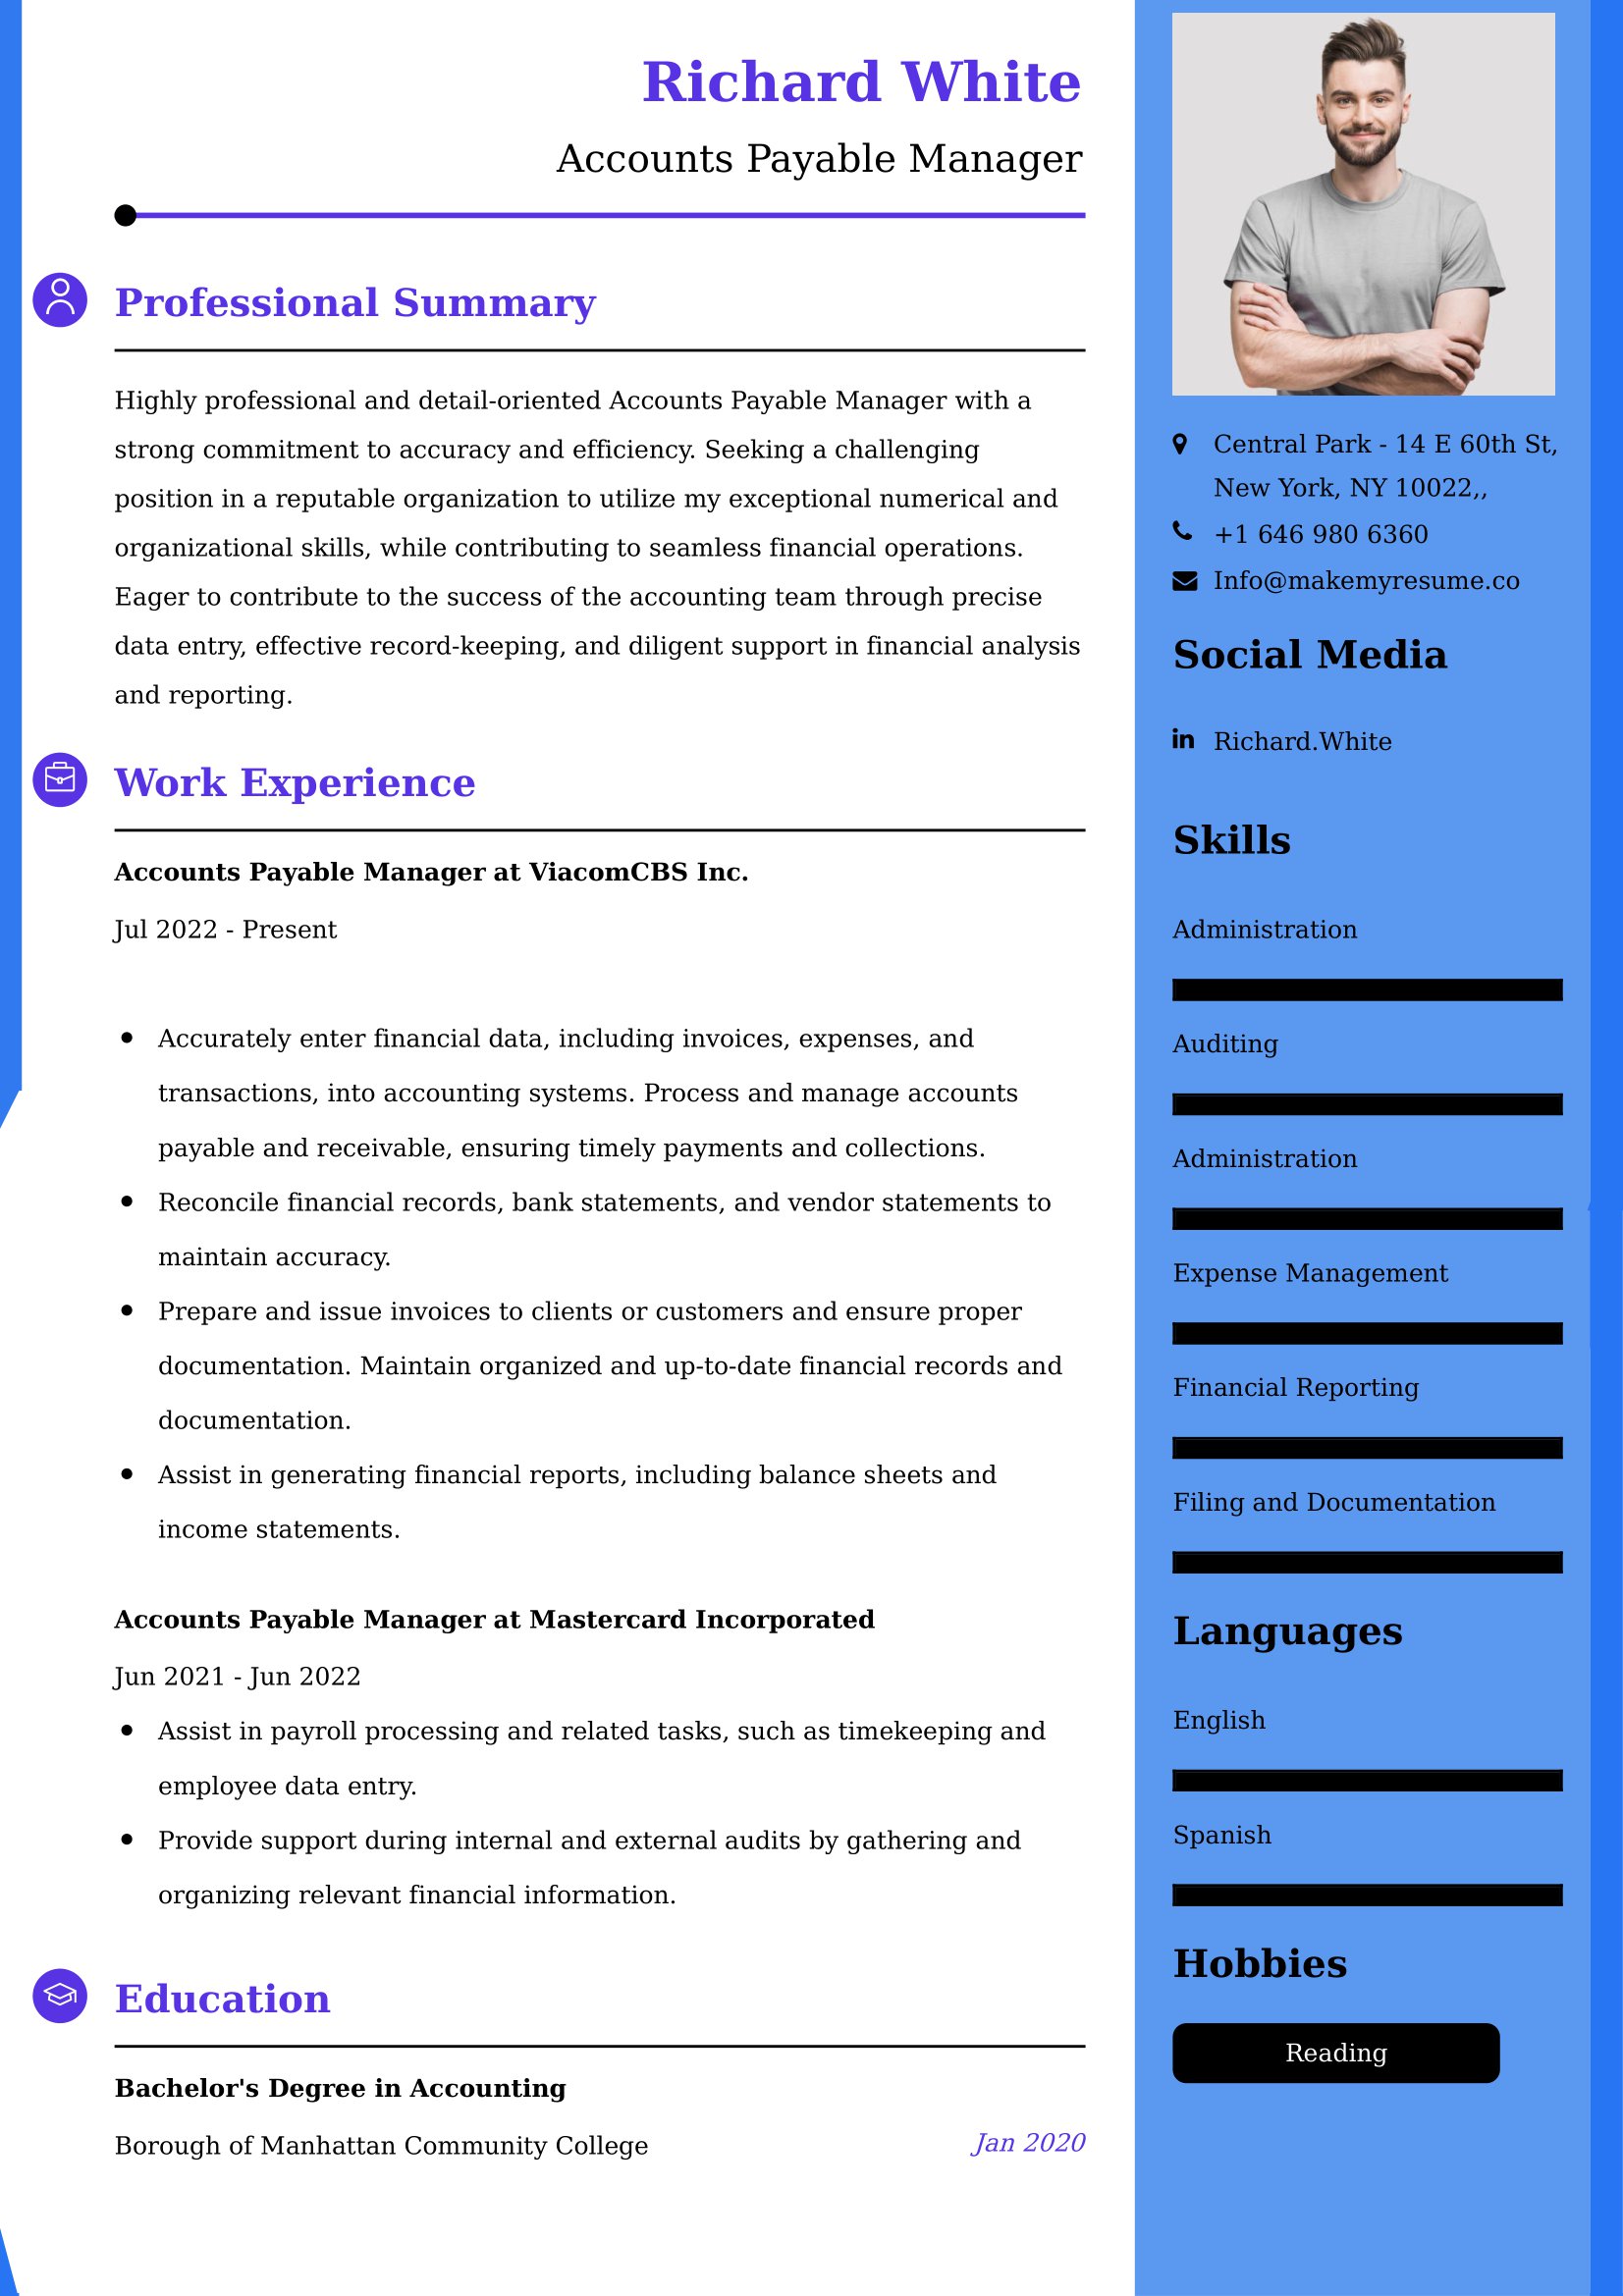 Accounts Payable Manager Resume Examples - UK Format, Latest Template.